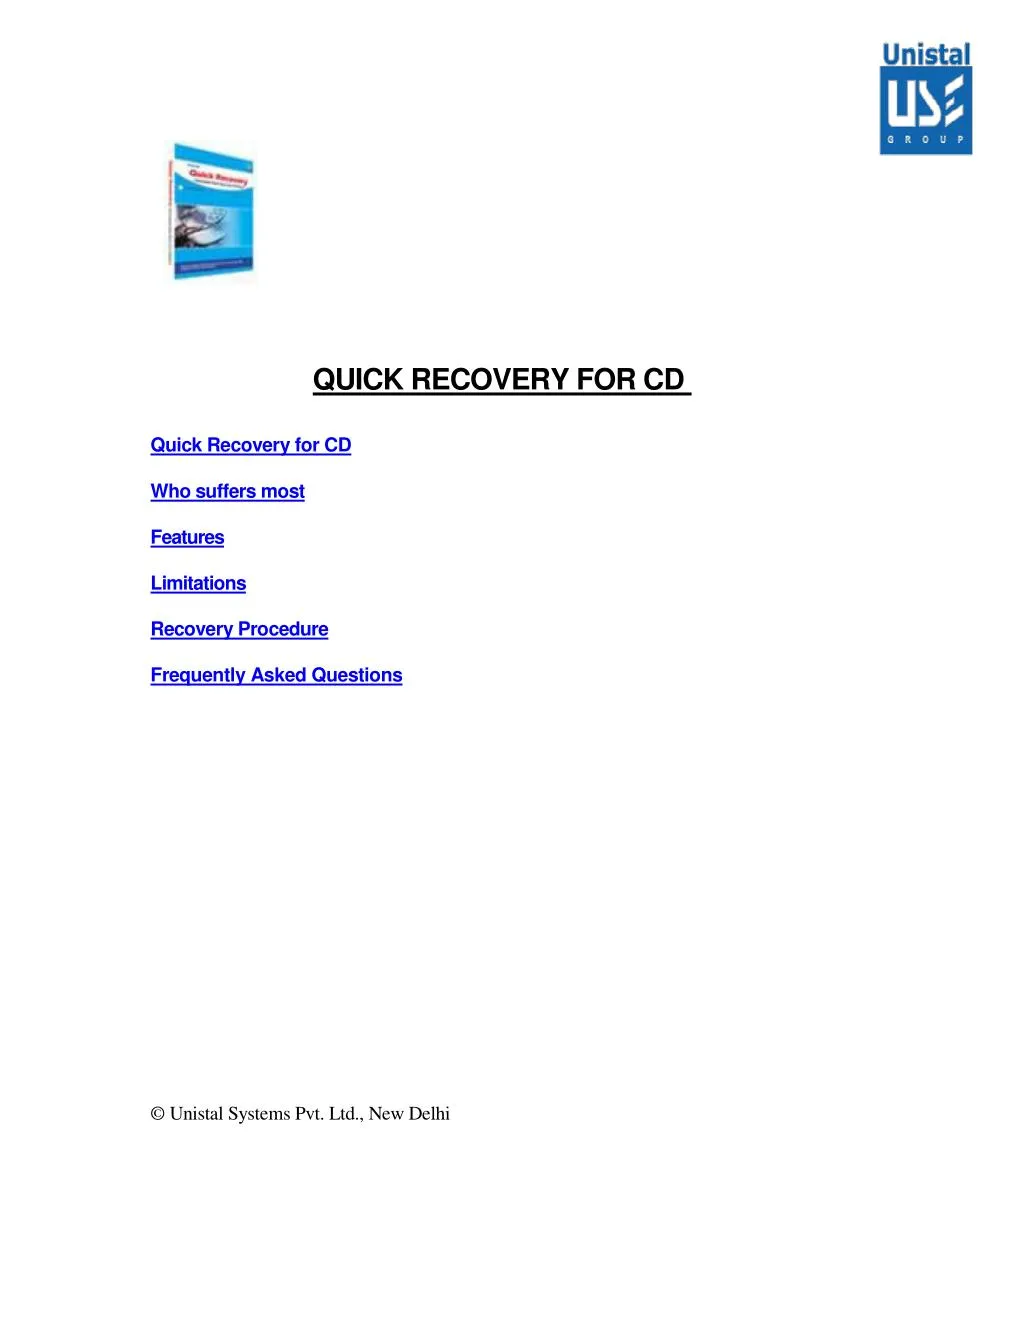 quick recovery for cd quick recovery